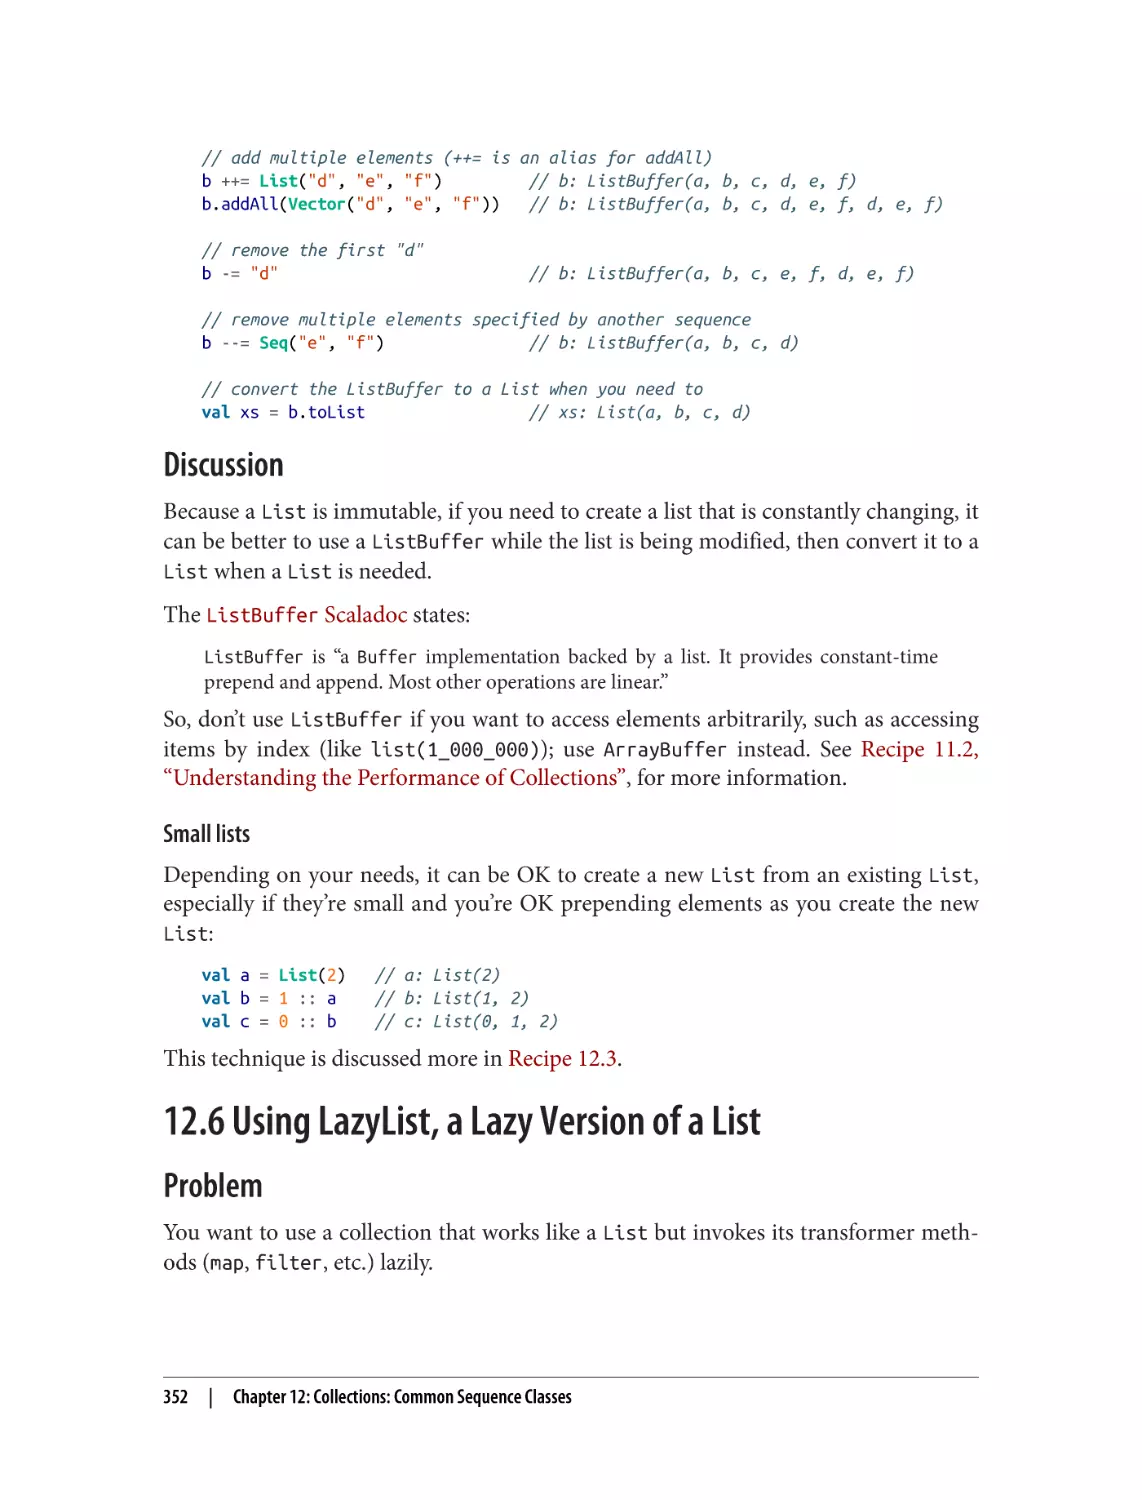 Discussion
12.6 Using LazyList, a Lazy Version of a List
Problem